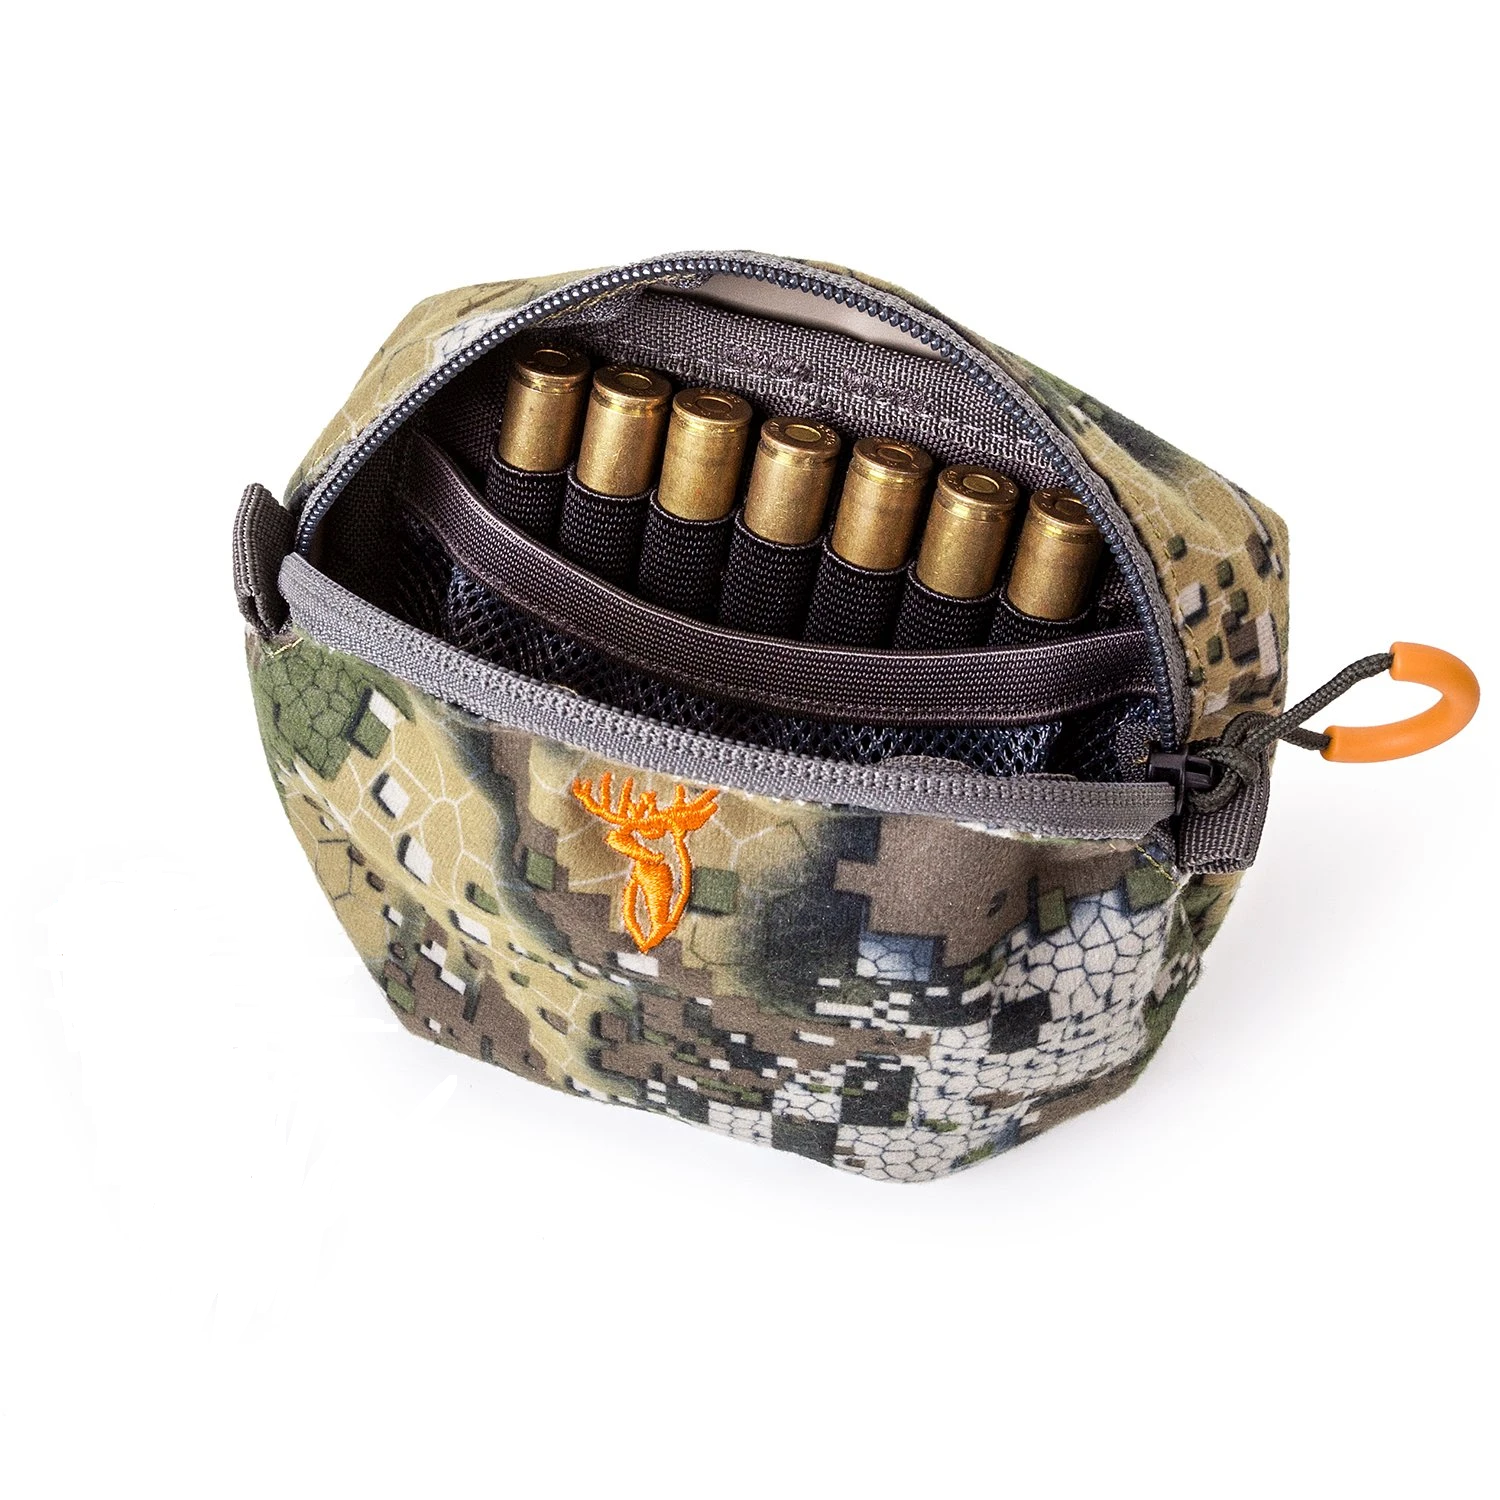 Hunters Element Edge Pouch Desolve Veil - Large -  - Mansfield Hunting & Fishing - Products to prepare for Corona Virus